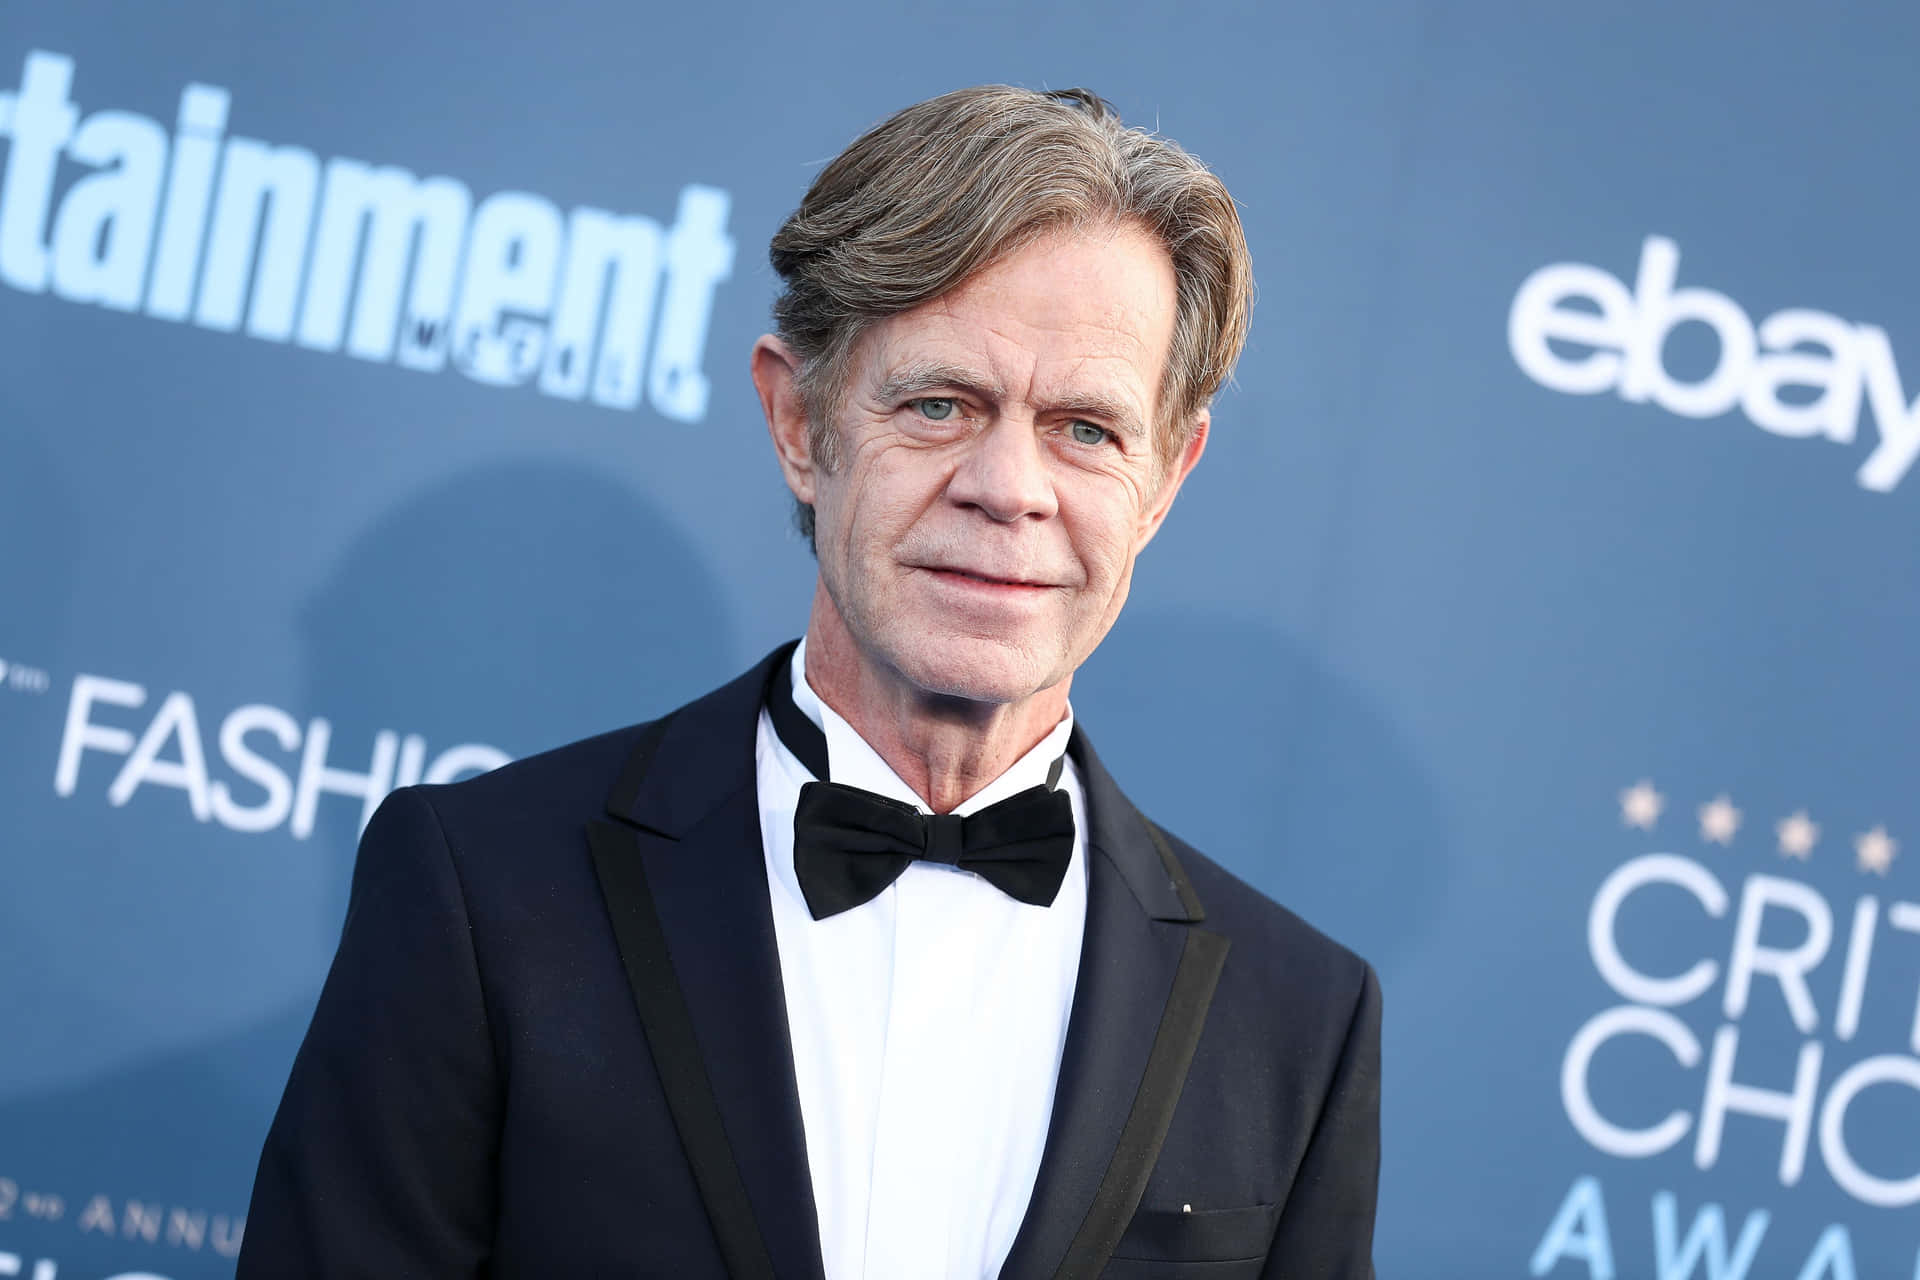 William H. Macy poses on the red carpet at a prestigious event Wallpaper